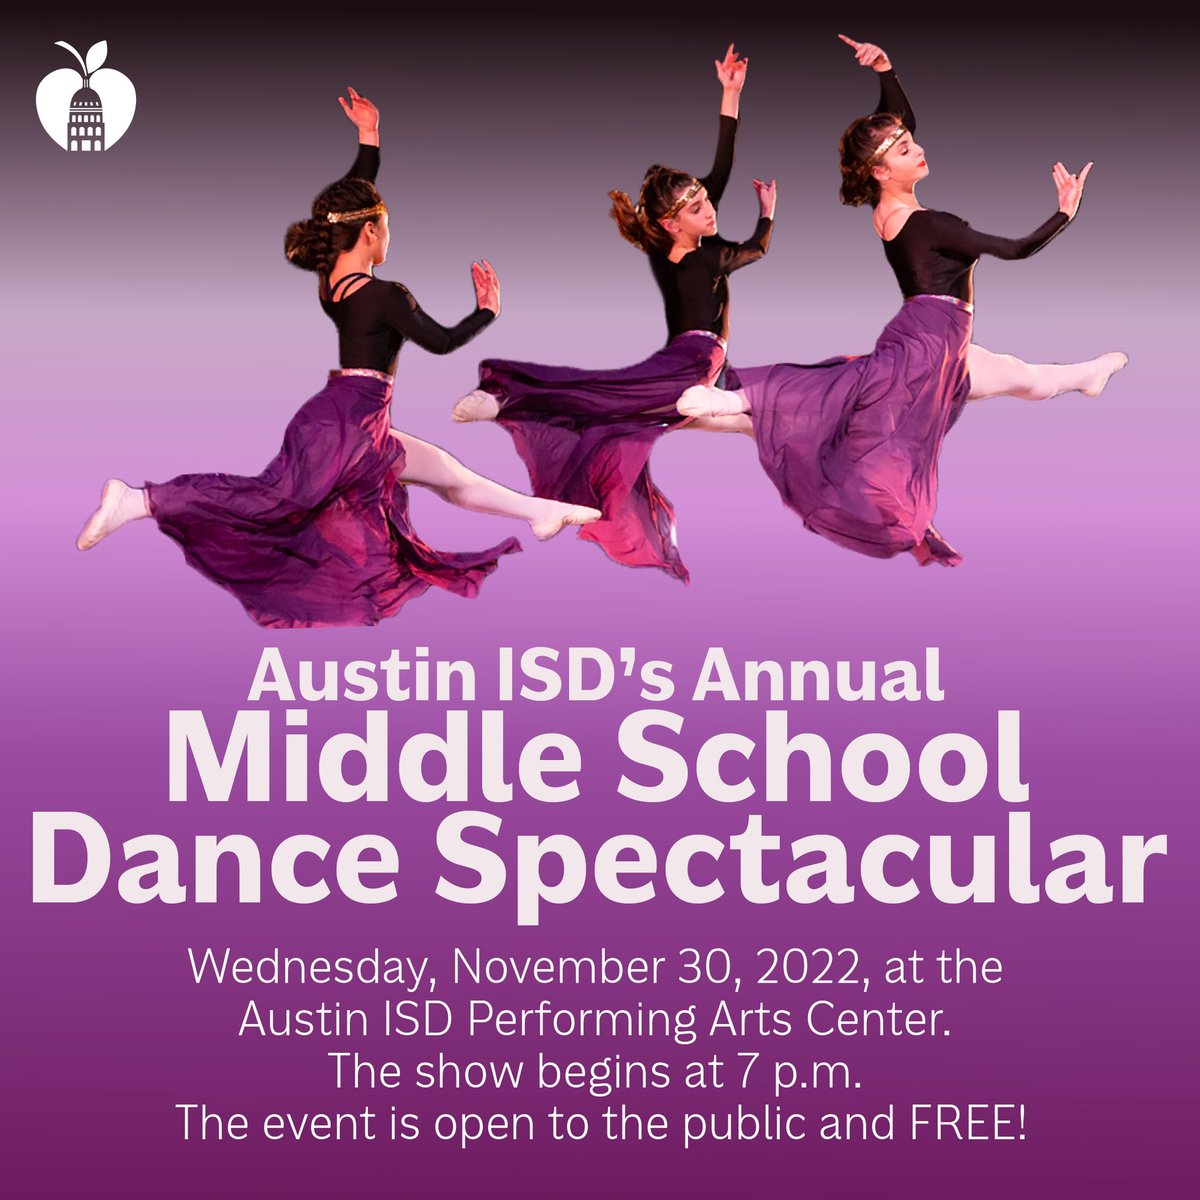 Did you miss your chance to see the 2022 @AustinISD Middle School Dance Spectacular? Check out the video here: youtu.be/RcKbi49BYA8 @AustinISDPAC @Fine_Arts_PT @DeLeonTeaches @AISDSuptMays @AustinEdFund @AisdMiddle @DrDiaz_AISD #AISDProud #TalentGrowsHere